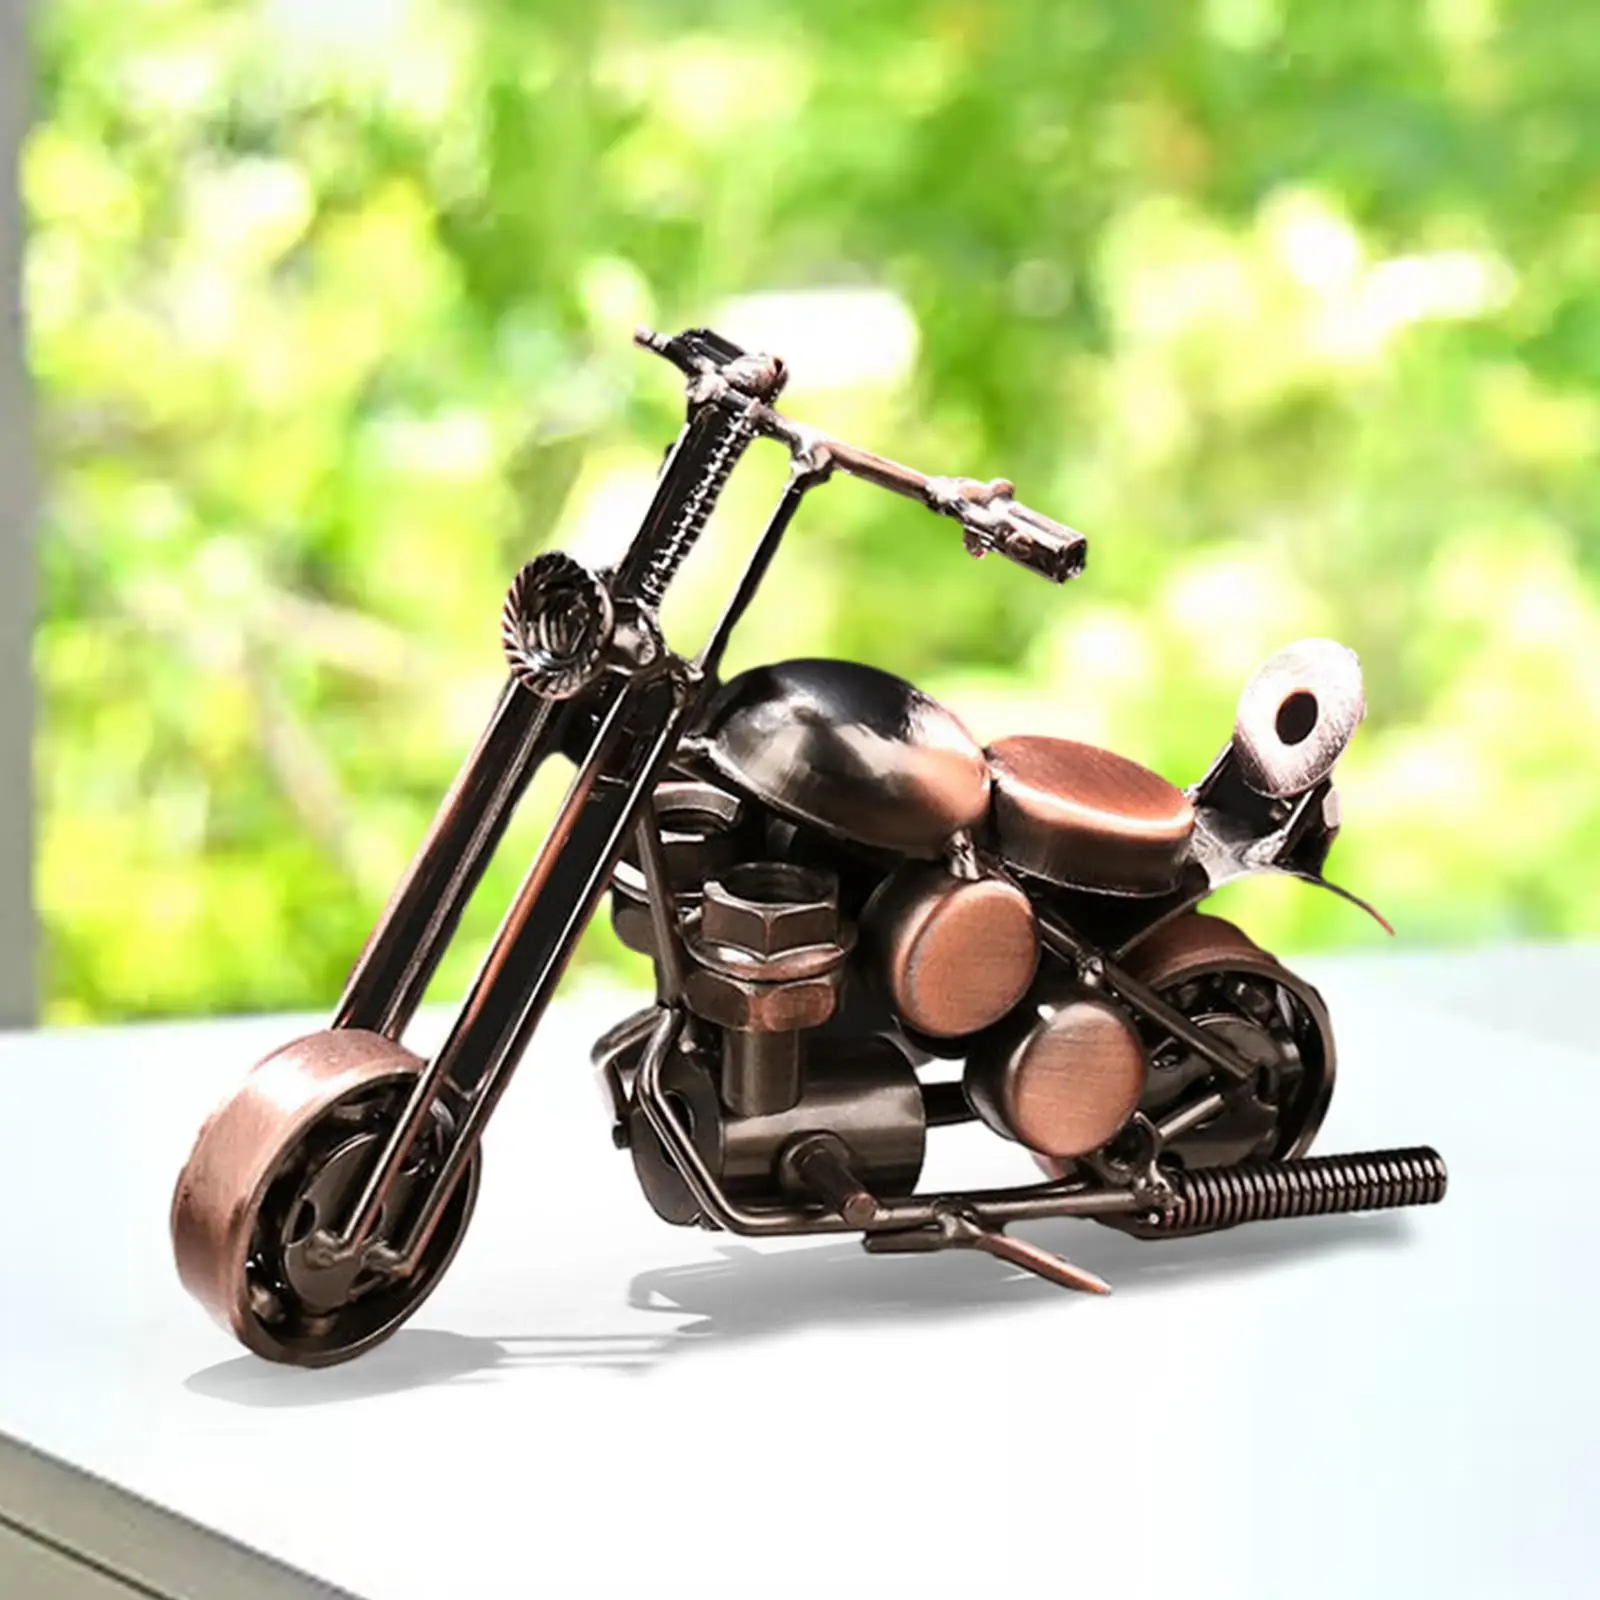 Motorcycle Model Motorcycle Sculpture Birthday Gift Figure Artwork Accessories Motorcycle Figurine for Desk Home Office Son Boys